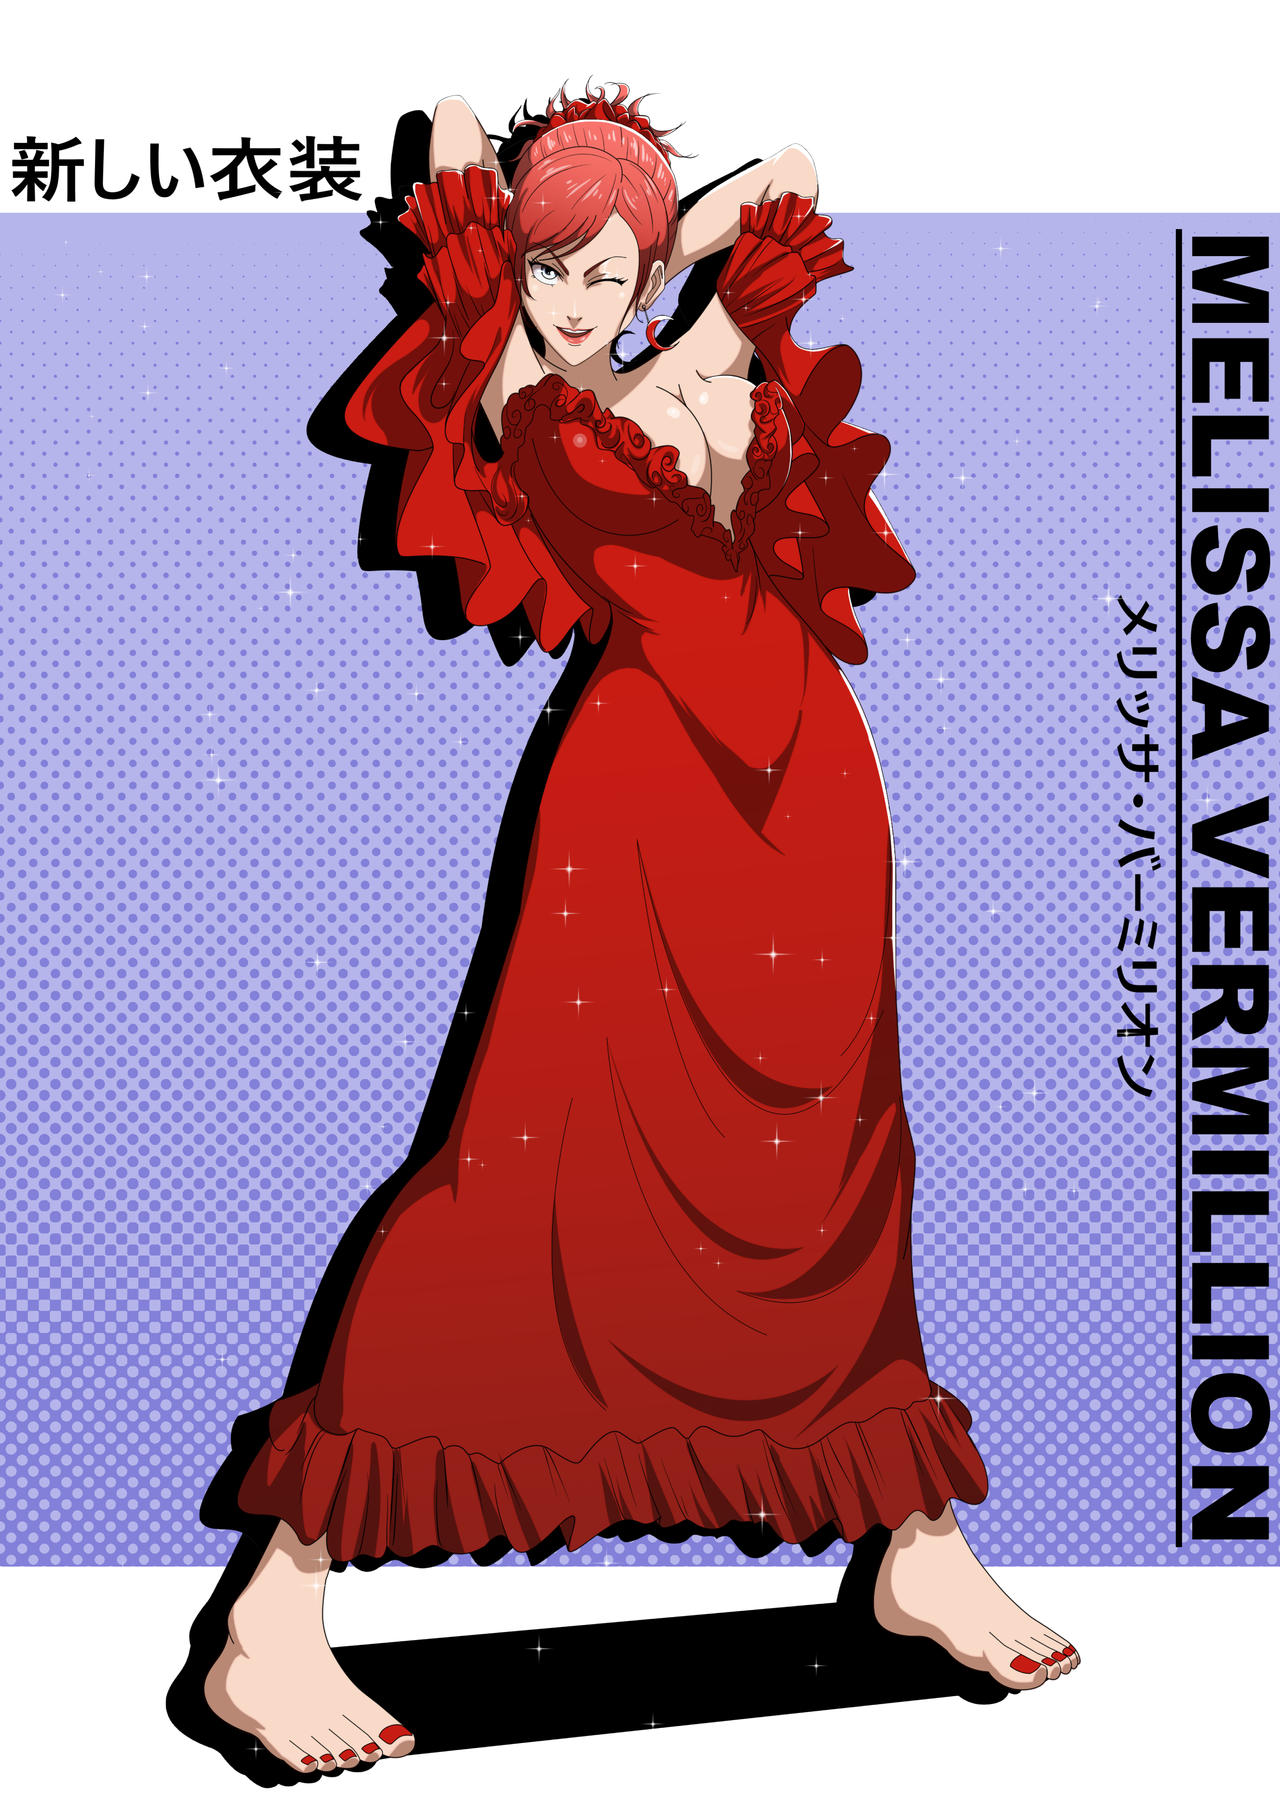 Melissa Showing Off Her Red Dress By Hollowtaker On Deviantart